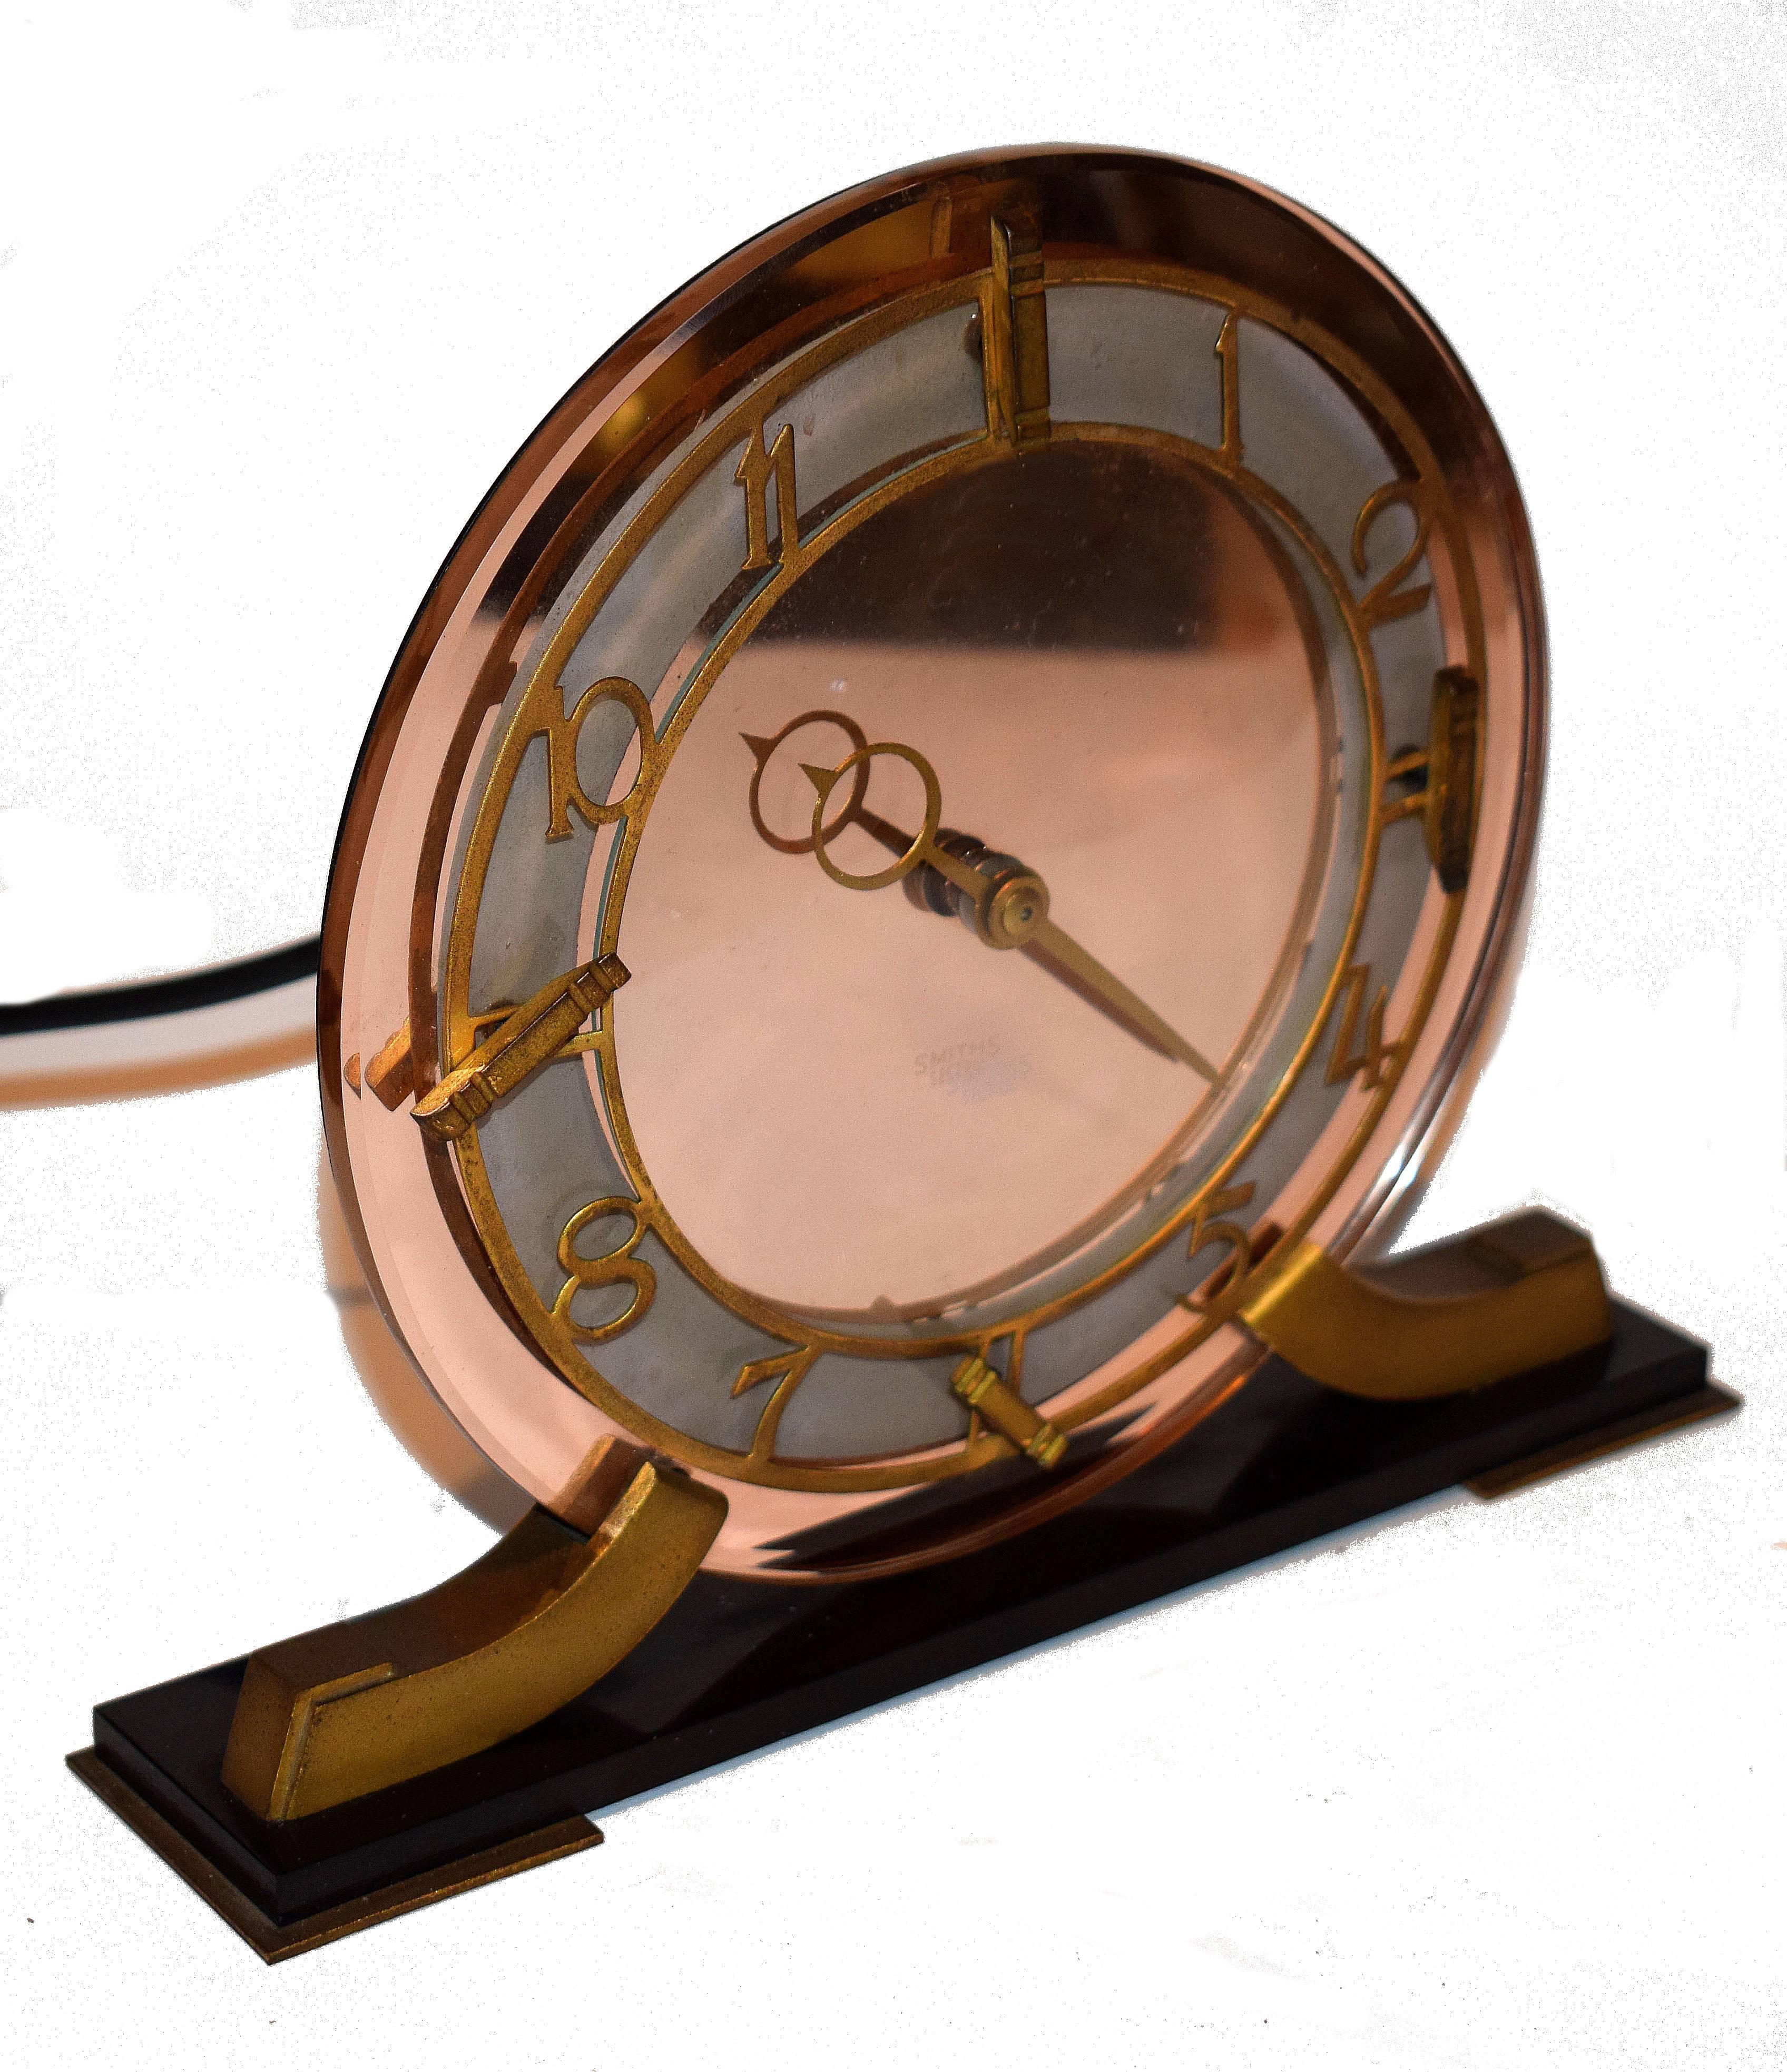 Very attractive and glamourous 1930s Art Deco Modernist clock by Smiths, an English maker. Runs on electric so no winding needed. Features a heavy thick pink mirror glass face with gilded Bezel and black plinth. The condition is excellent, showing